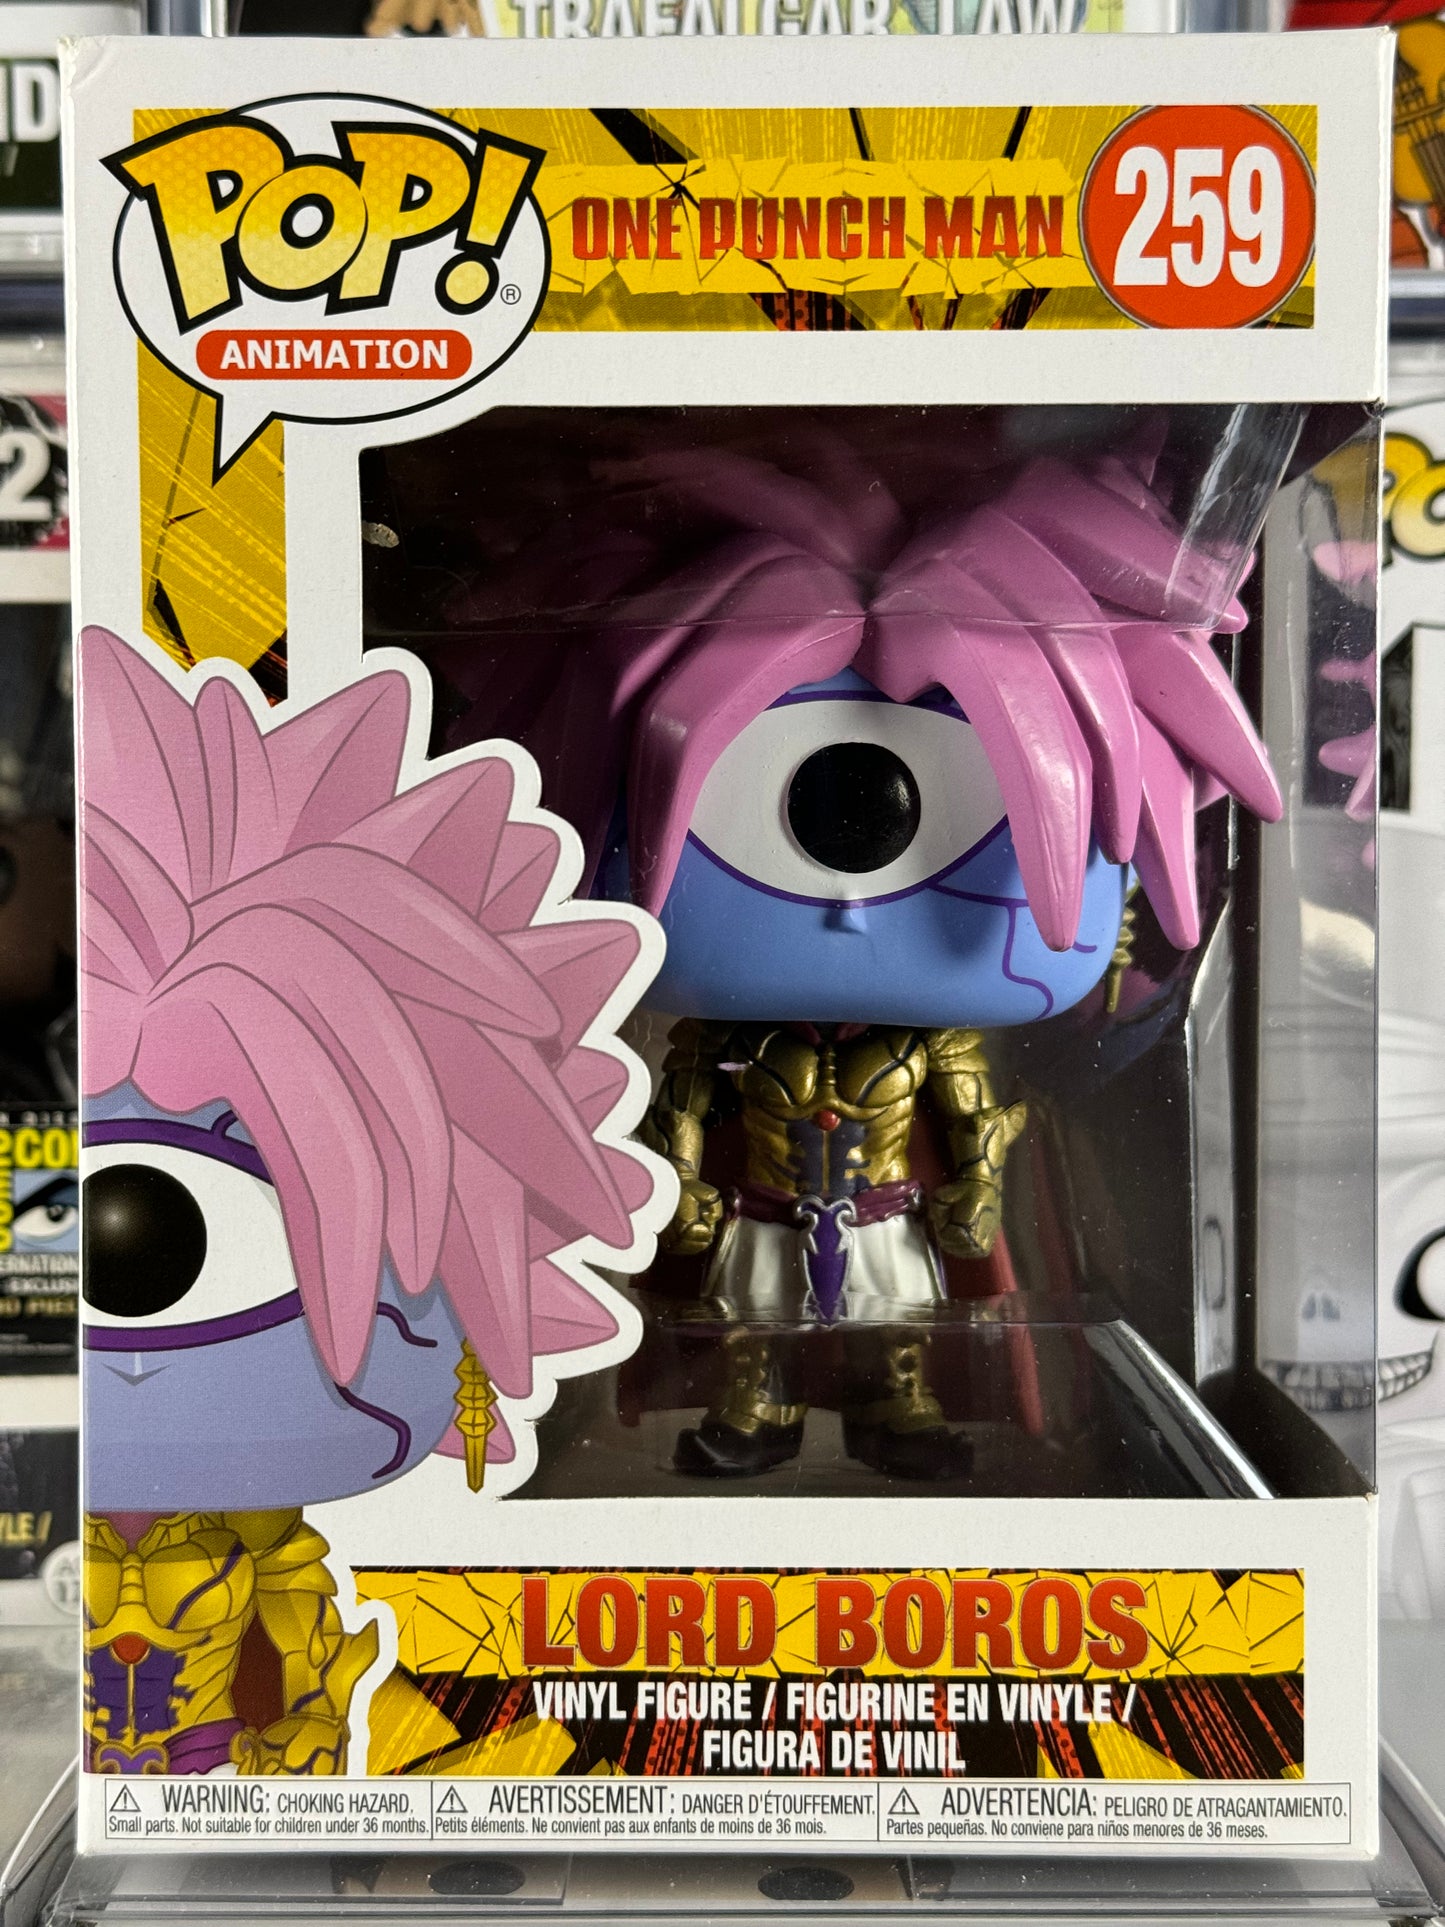 One Punch Man - Lord Boros (259) Vaulted